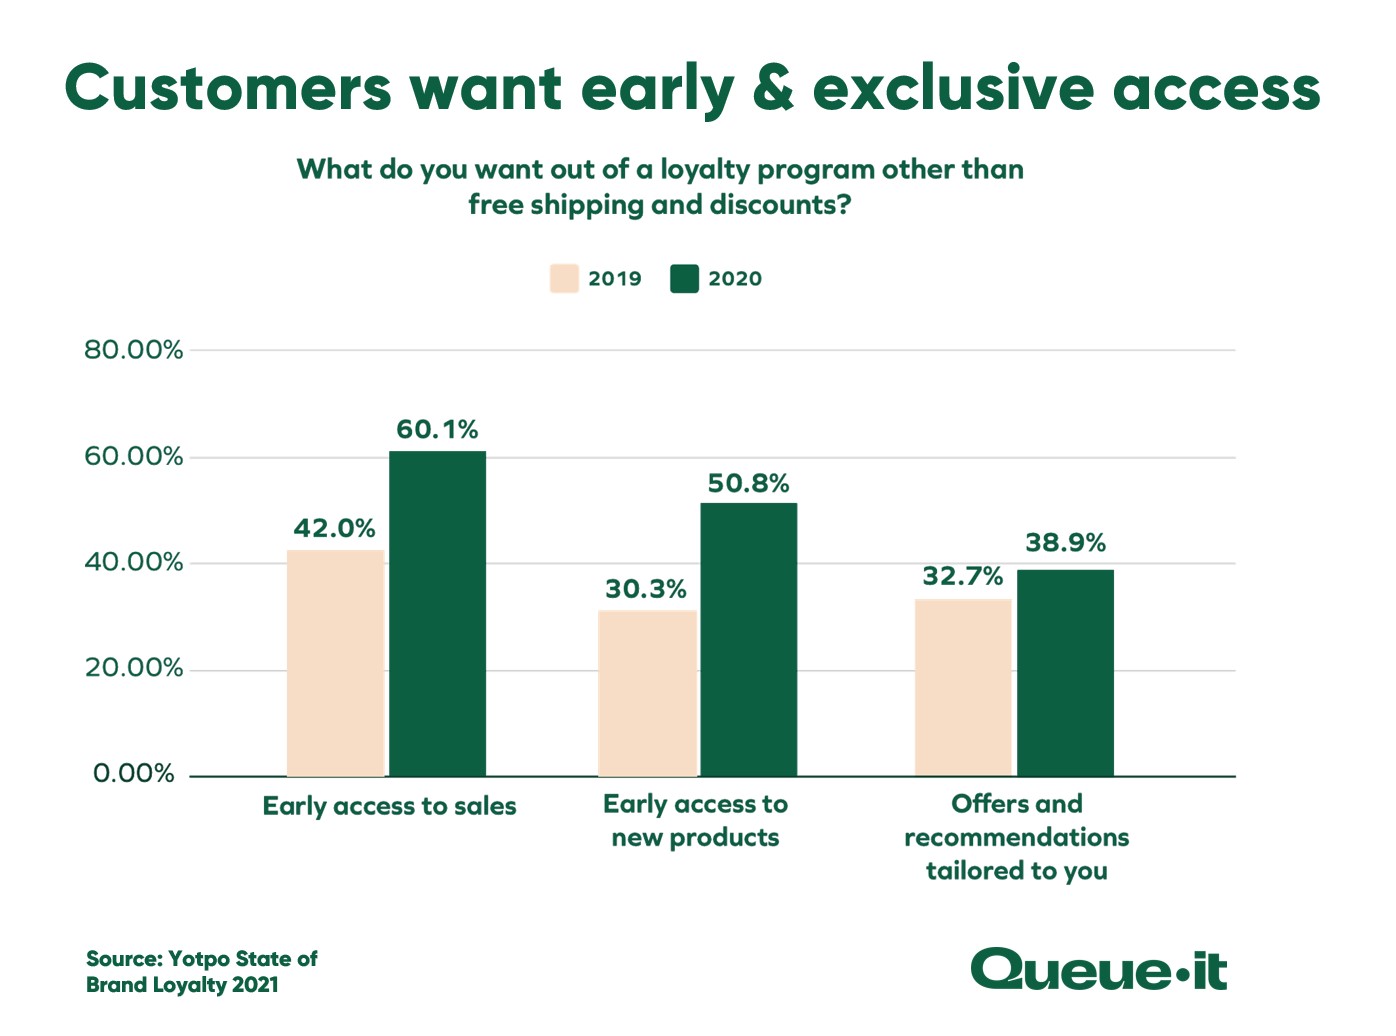 Customers want early and exclusive access survey results